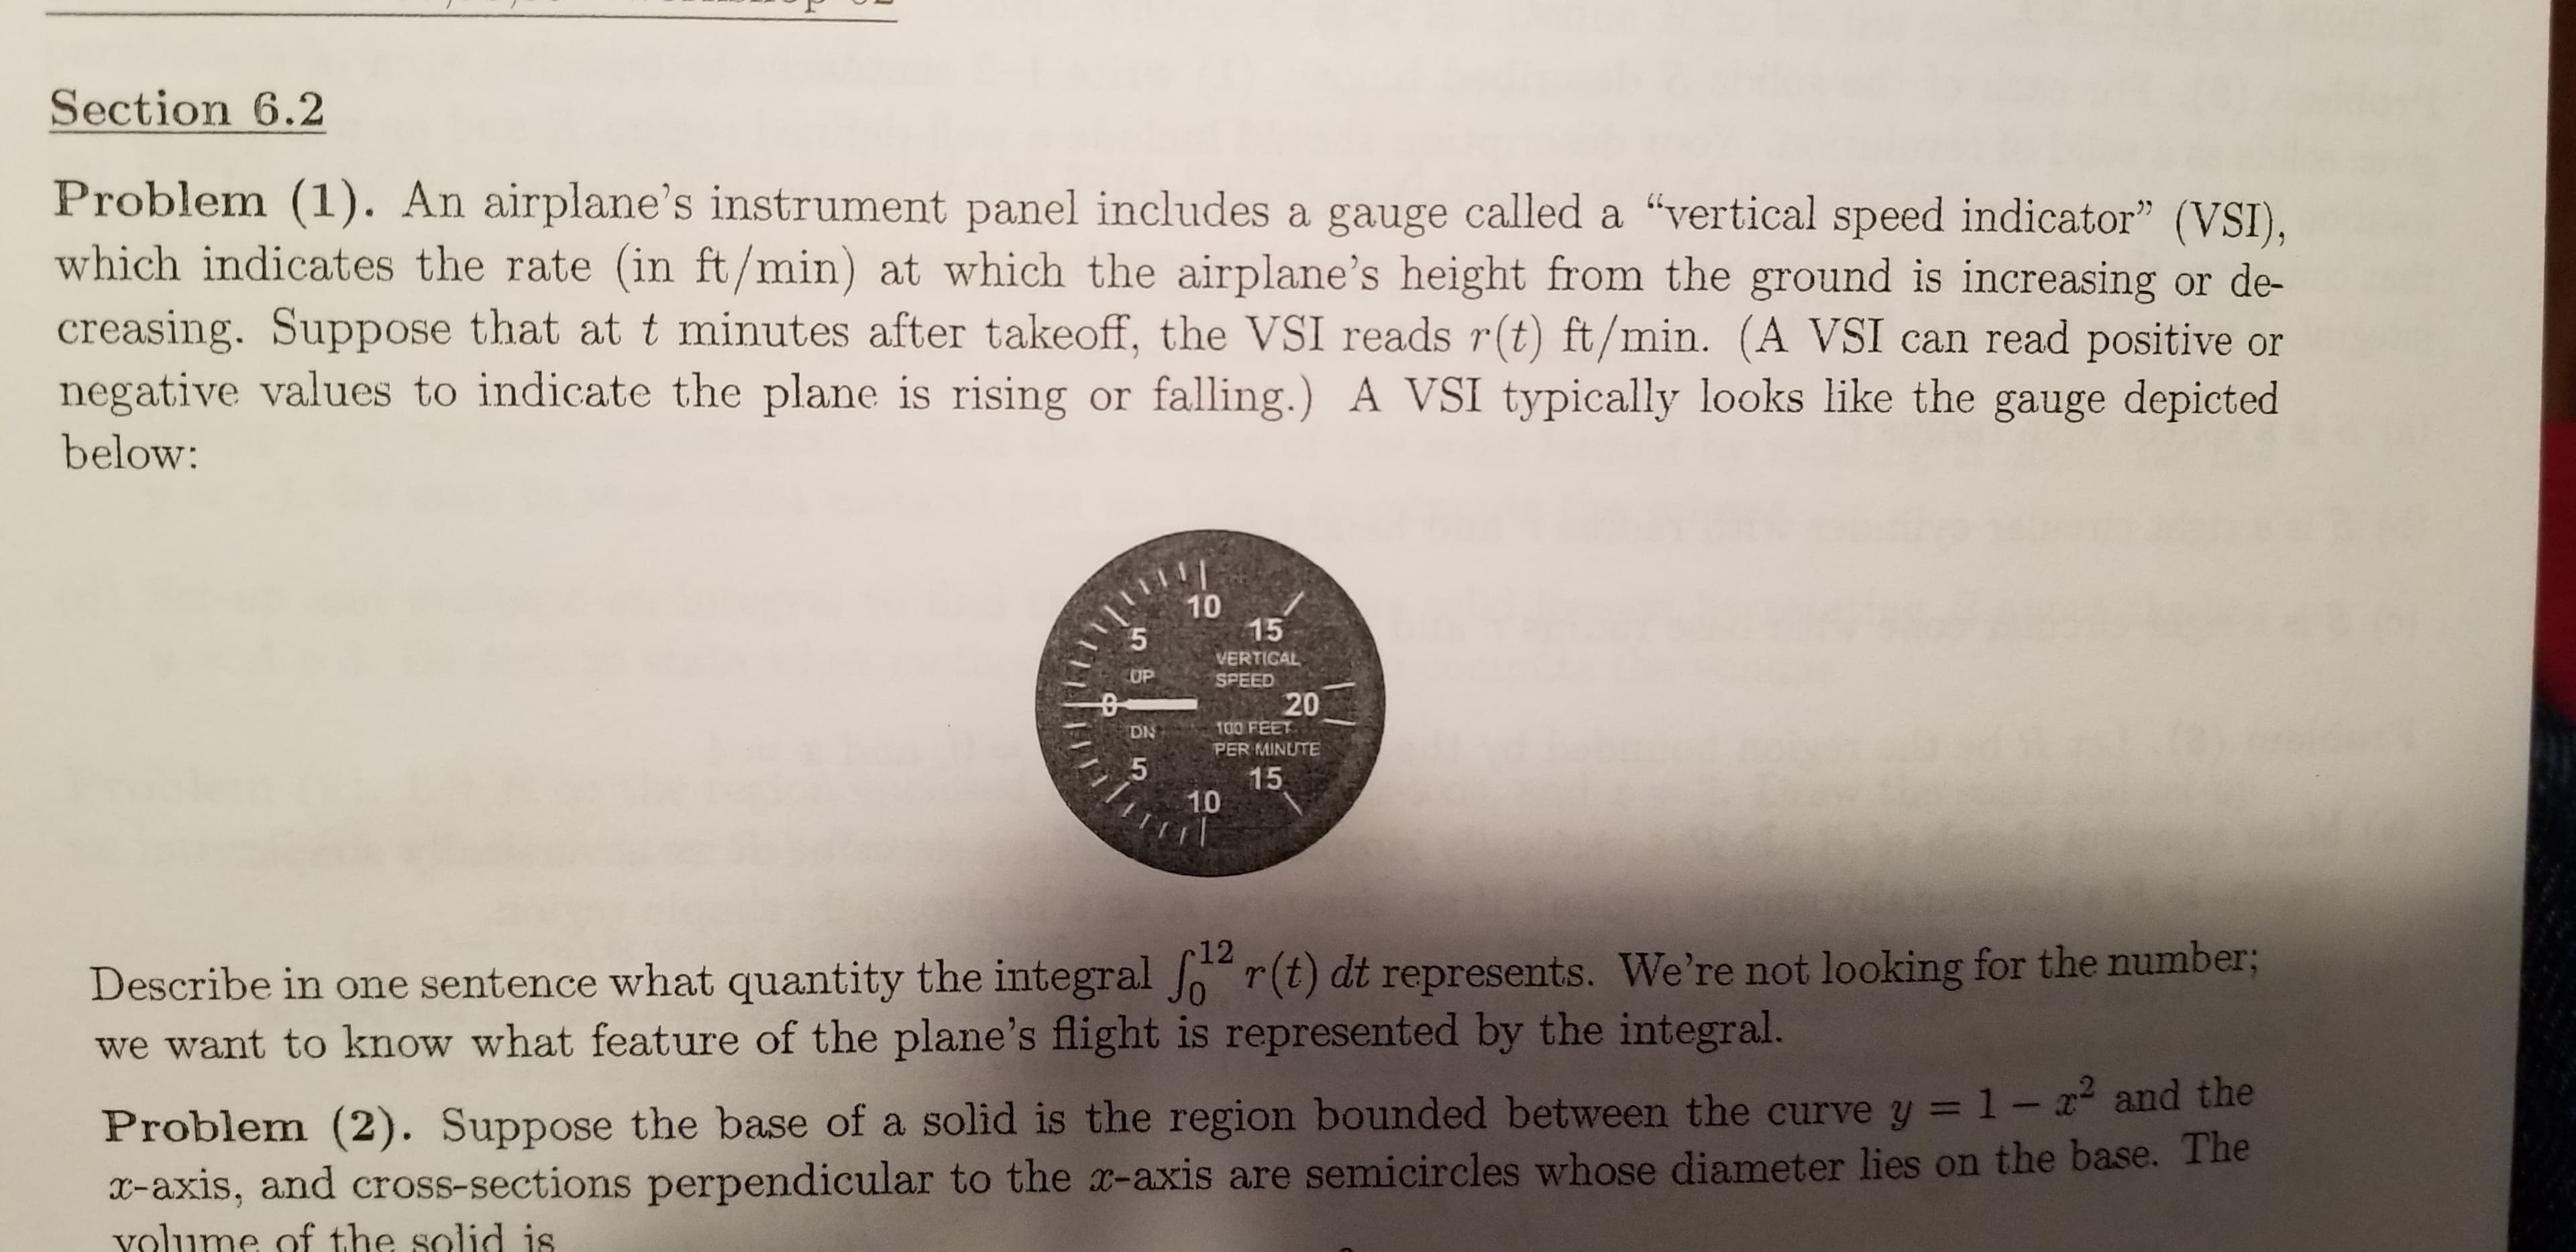 Section 6.2
Problem (1). An airplane's instrument panel includes a gauge called a "vertical speed indicator" (VSI),
which indicates the rate (in ft/min) at which the airplane's height from the ground is increasing or de-
creasing. Suppose that at t minutes after takeoff, the VSI reads r(t) ft/min. (A VSI can read positive or
negative values to indicate the plane is rising or falling.) A VSI typically looks like the gauge depicted
below:
10
15
VERTICAL
SPEED
20
UP
100 FEET
DN
PER MINUTE
15
10
Describe in ome sentence what quantity the integral r(t) dt represents. We're not looking for the number3B
we want to know what feature of the plane's flight is represented by the integral.
12
Problem (2). Suppose the base of a solid is the region bounded between the curve y = 1-x and the
x-axis, and cross-sections perpendicular to the x-axis are semicircles whose diameter lies on the base. The
volume of the solid is
